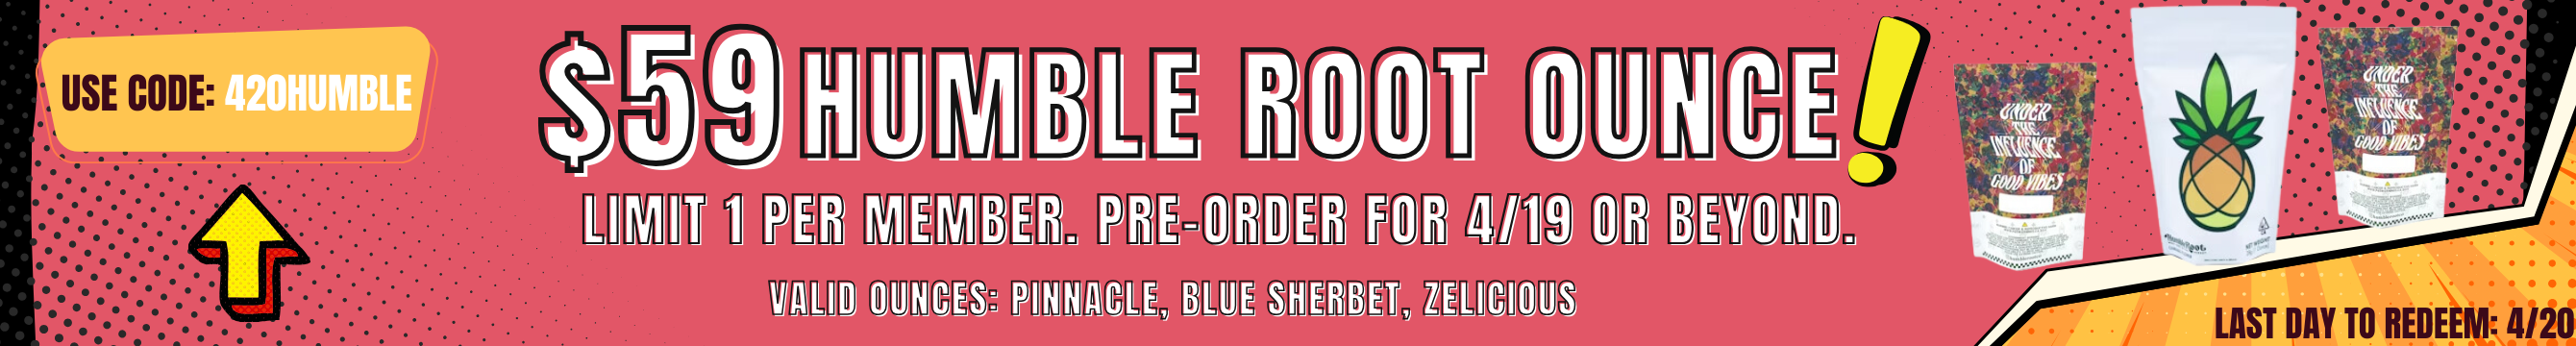 $59 Humble Root Ounce! Pre-order for 4/19 or beyond, limit 1 per member. Last day to redeem is April 20th.